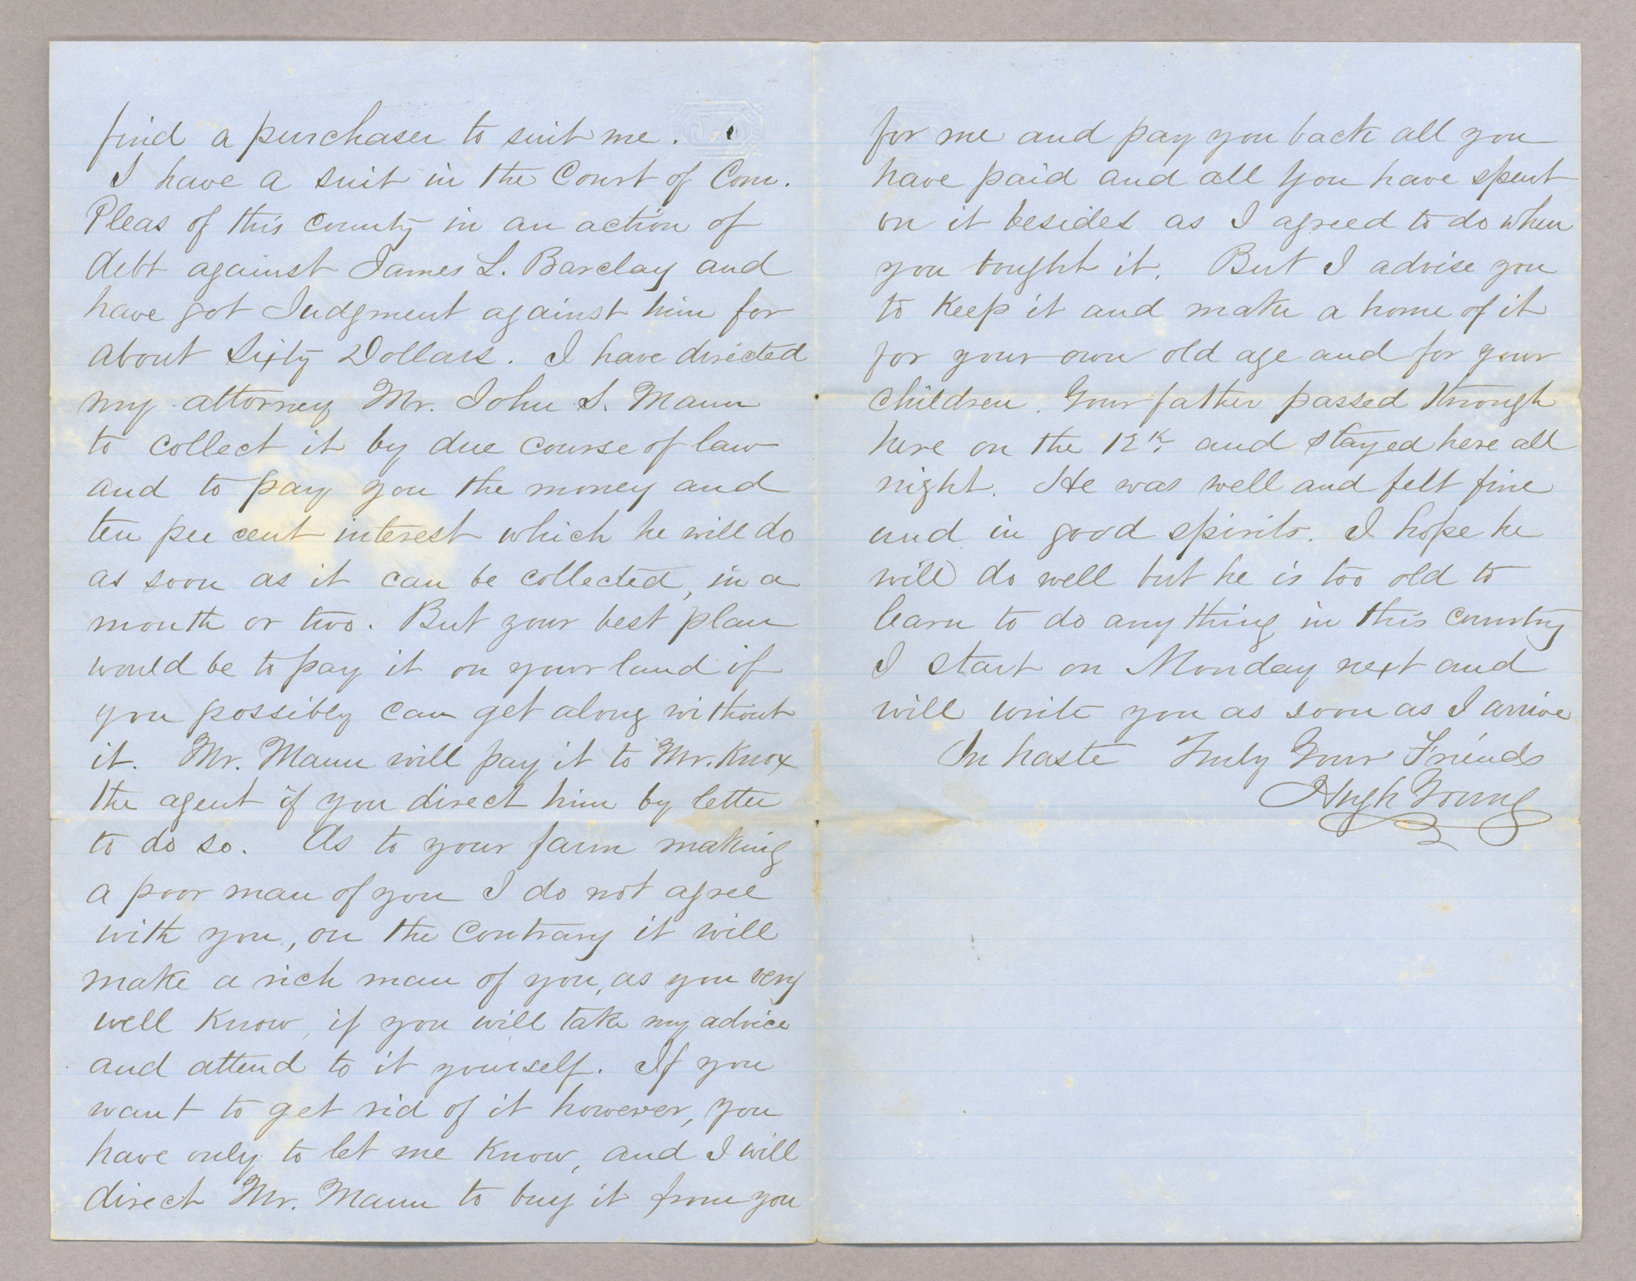 Letter. Hugh Young, Coudersport, Pennsylvania, to "Dear Johnny" [John E. Brownlee], n. p., Pages 2-3